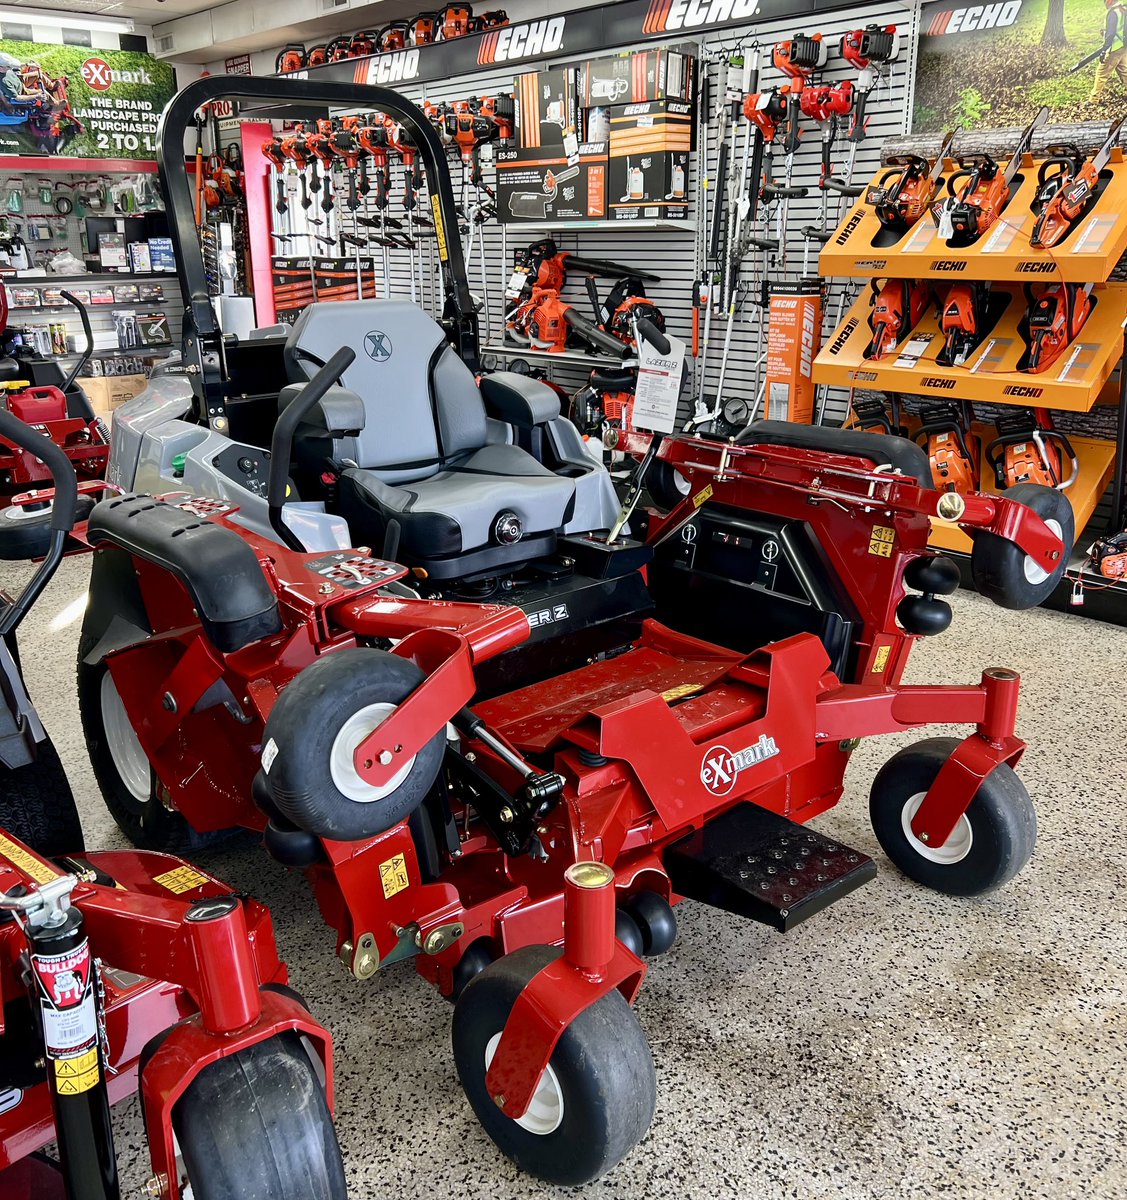 Exmark 96” Diesel Zero Turn now in stock! Stop by today to checkout this machine. 

#exmarkmowers #dieselmower